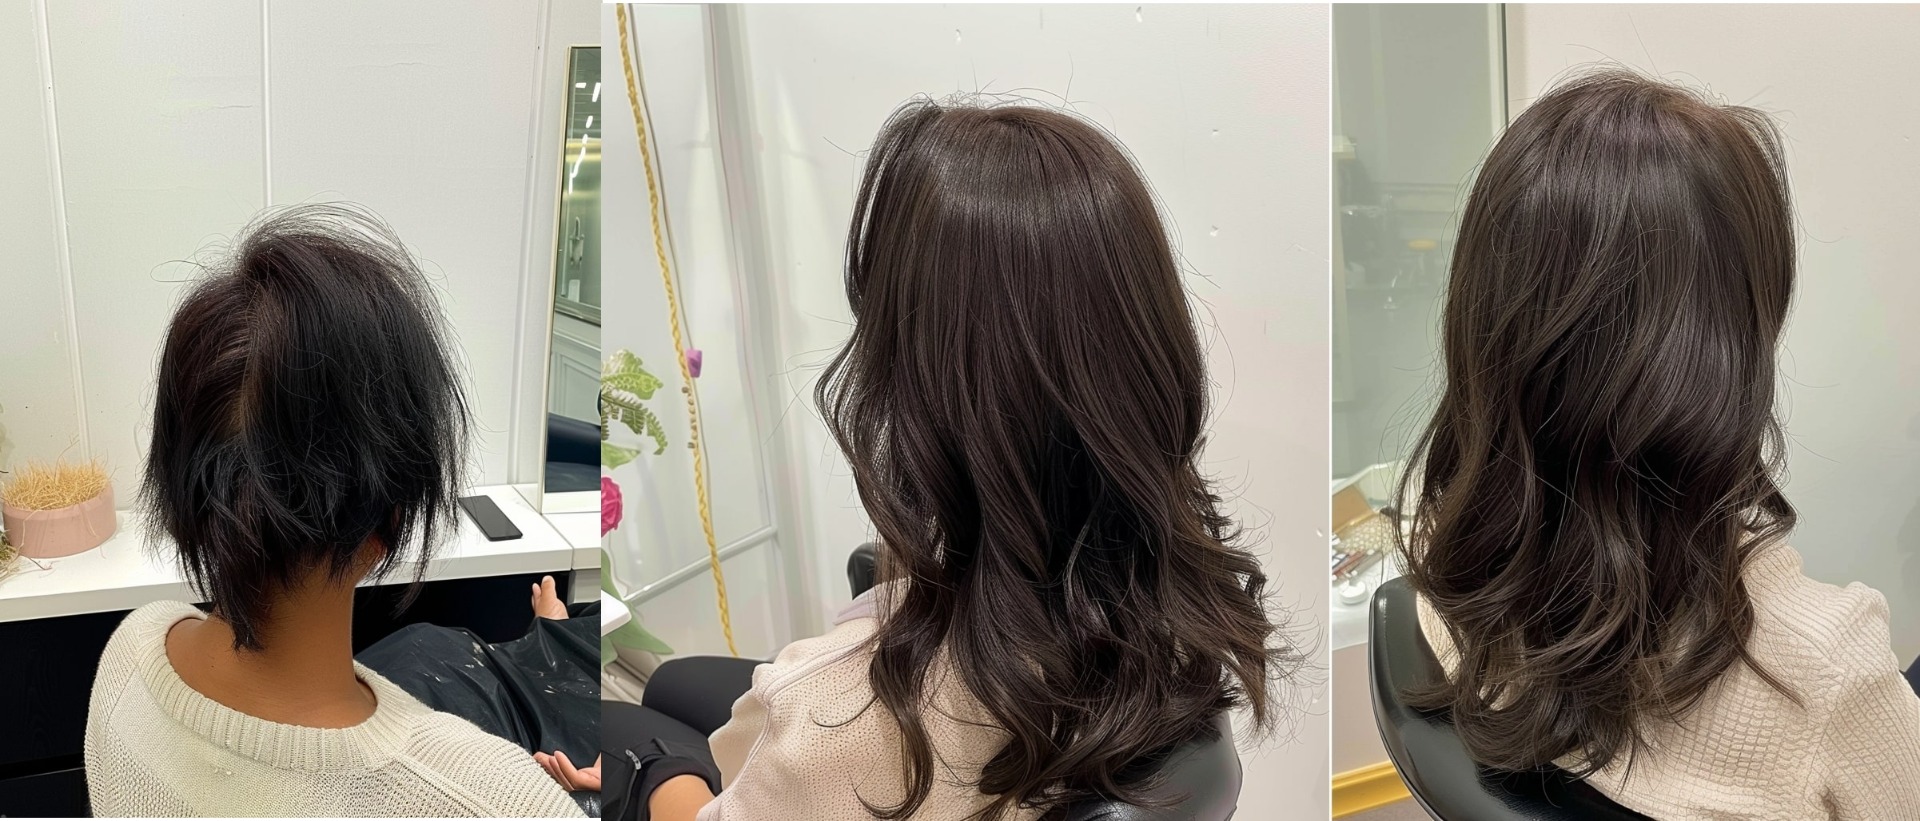 Before and After Hair Wigs USA Hair